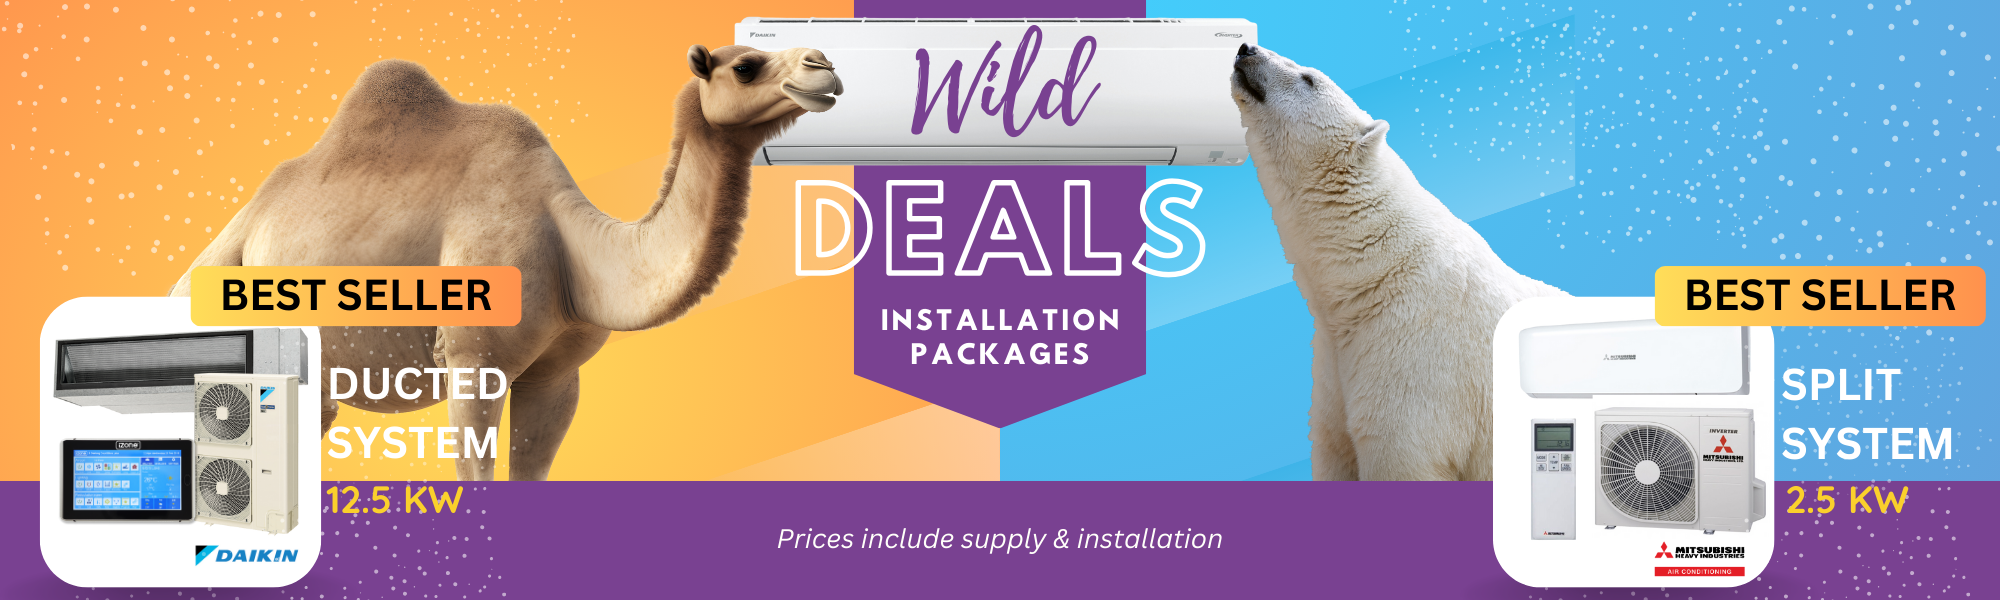 INSTALLATION PACKAGES